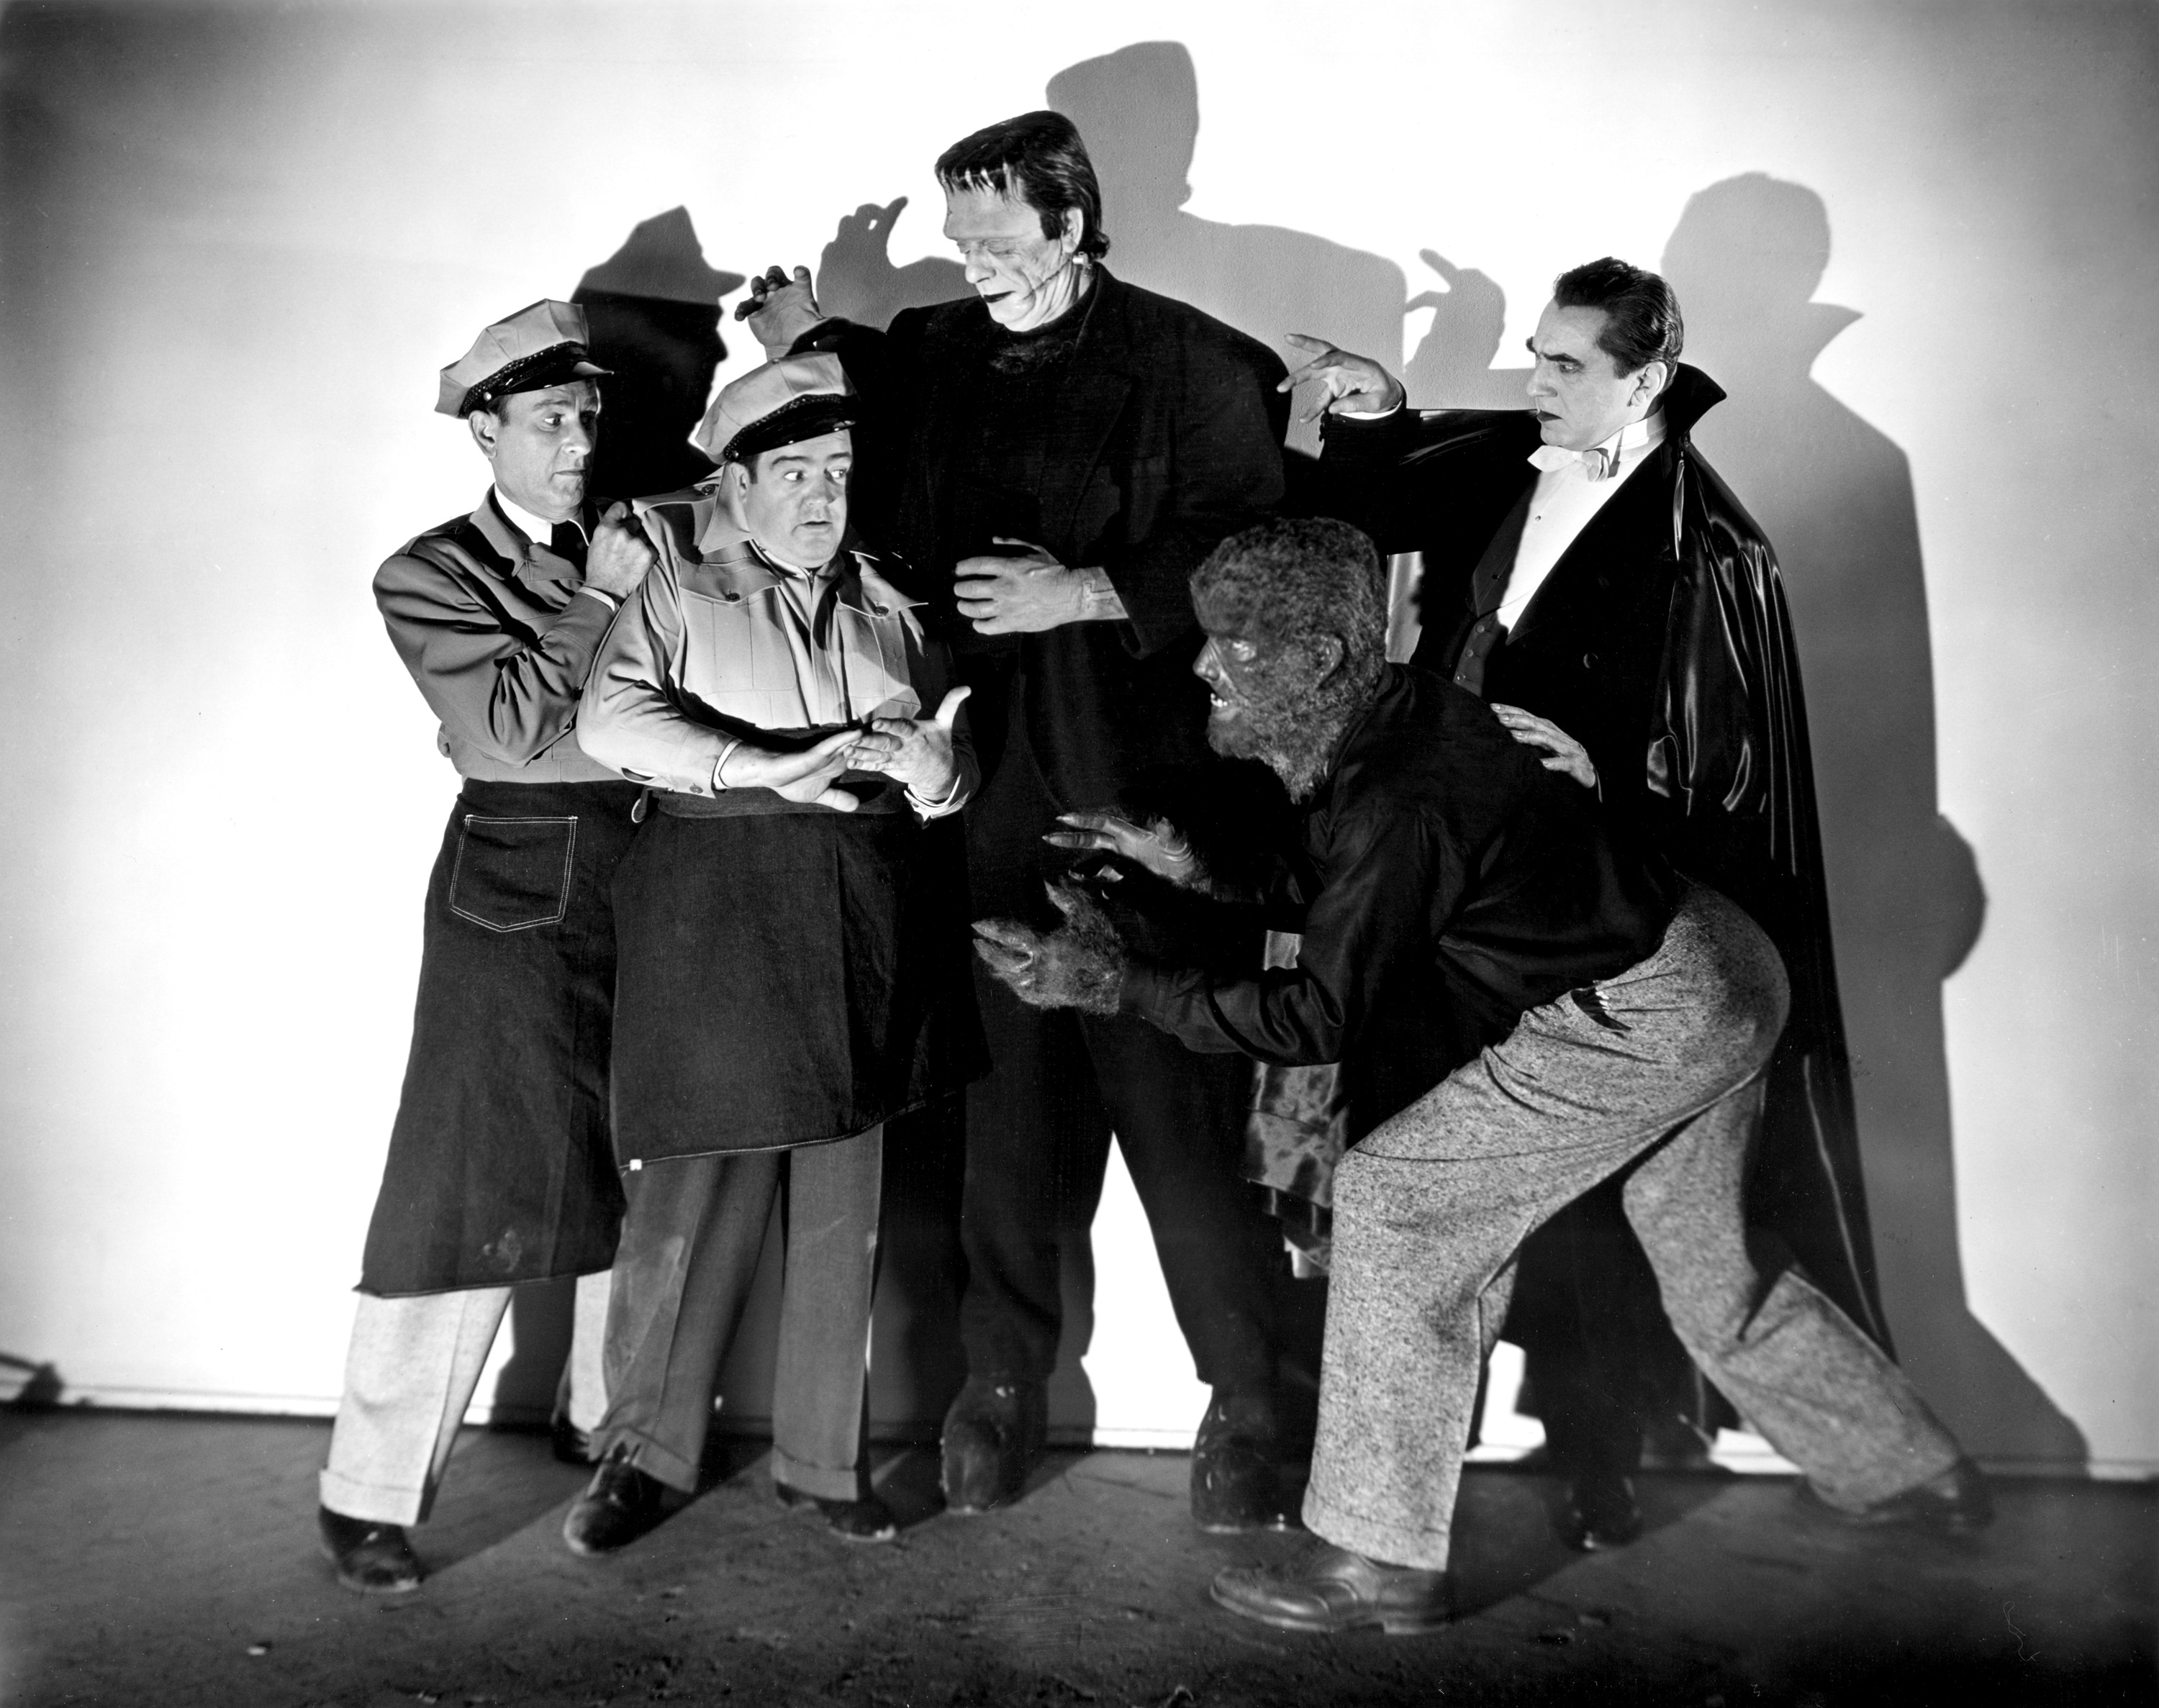 The Academy of Motion Picture Arts and Sciences will host a month-long series of screenings of classic horror films with “Universal’s Legacy of Horror” in October. The series is part of the studio’s year-long 100th anniversary celebration engaging Universal’s fans and all movie lovers in the art of moviemaking. Pictured: Bud Abbott, Lou Costello, Glenn Strange, Lon Chaney, Jr., and Bela Lugosi in ABBOTT AND COSTELLO MEET FRANKENSTEIN, 1948.